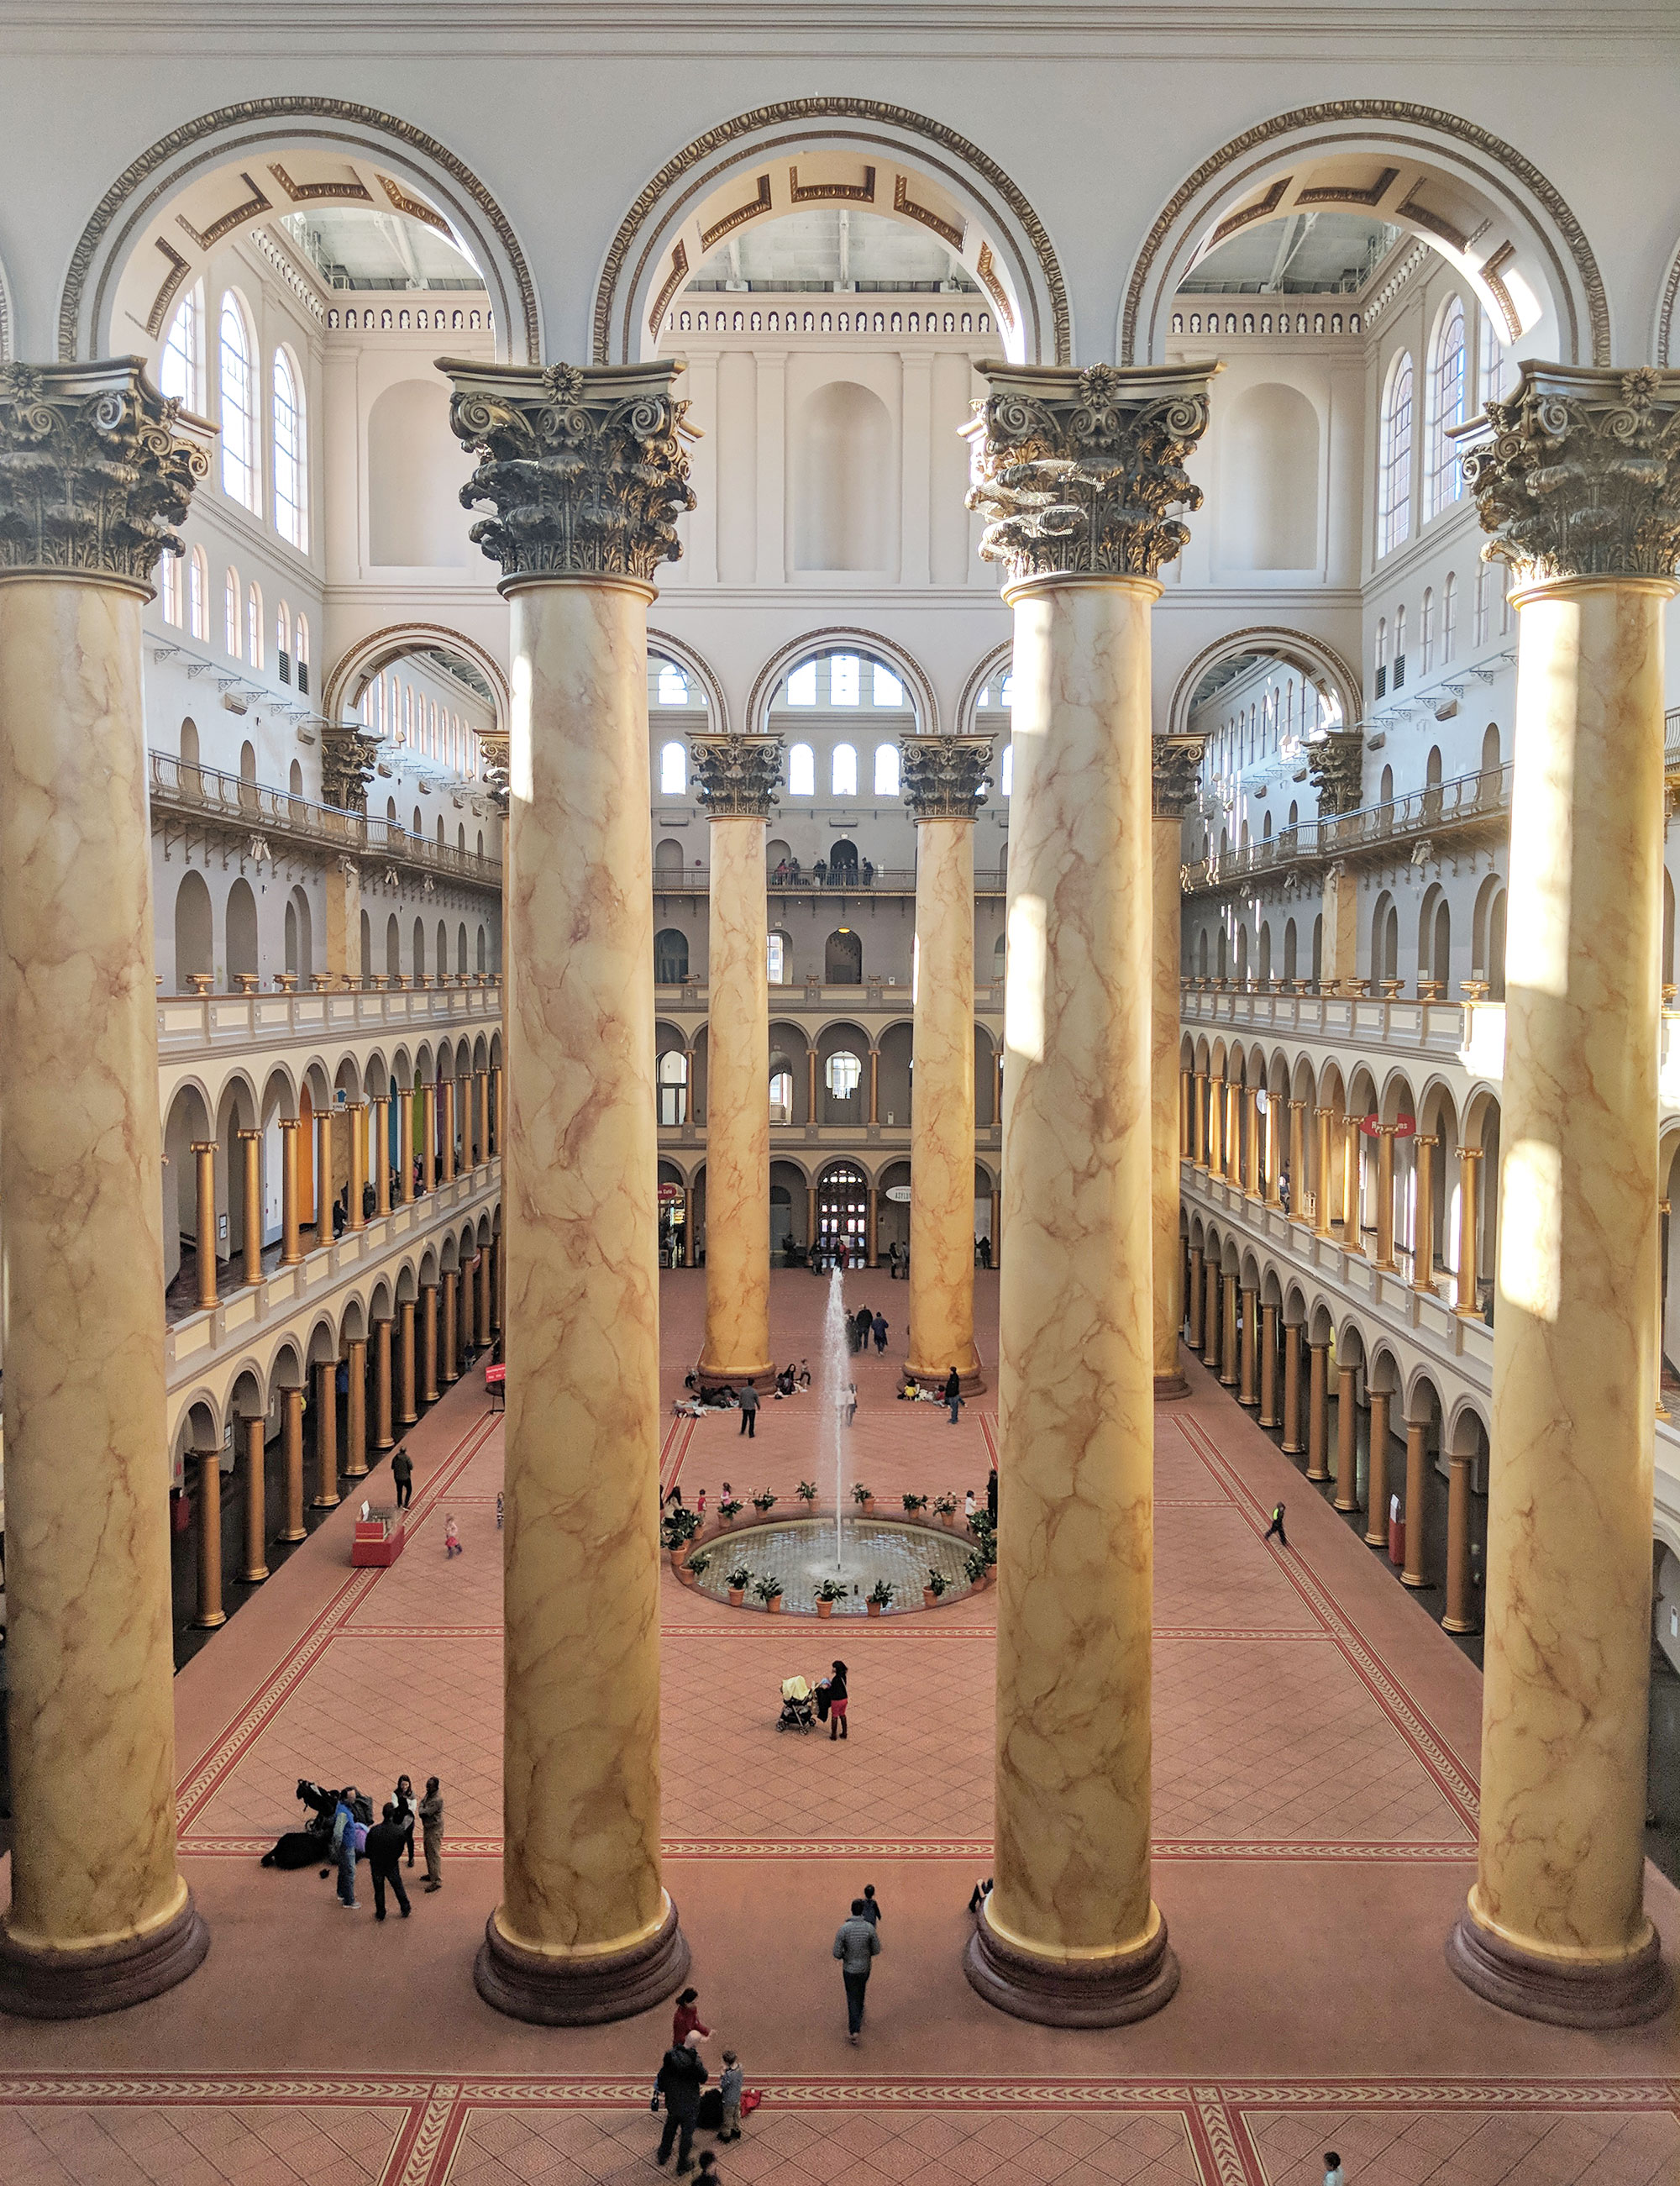 The interior courtyard of the National Building Museum in Washington D.C.